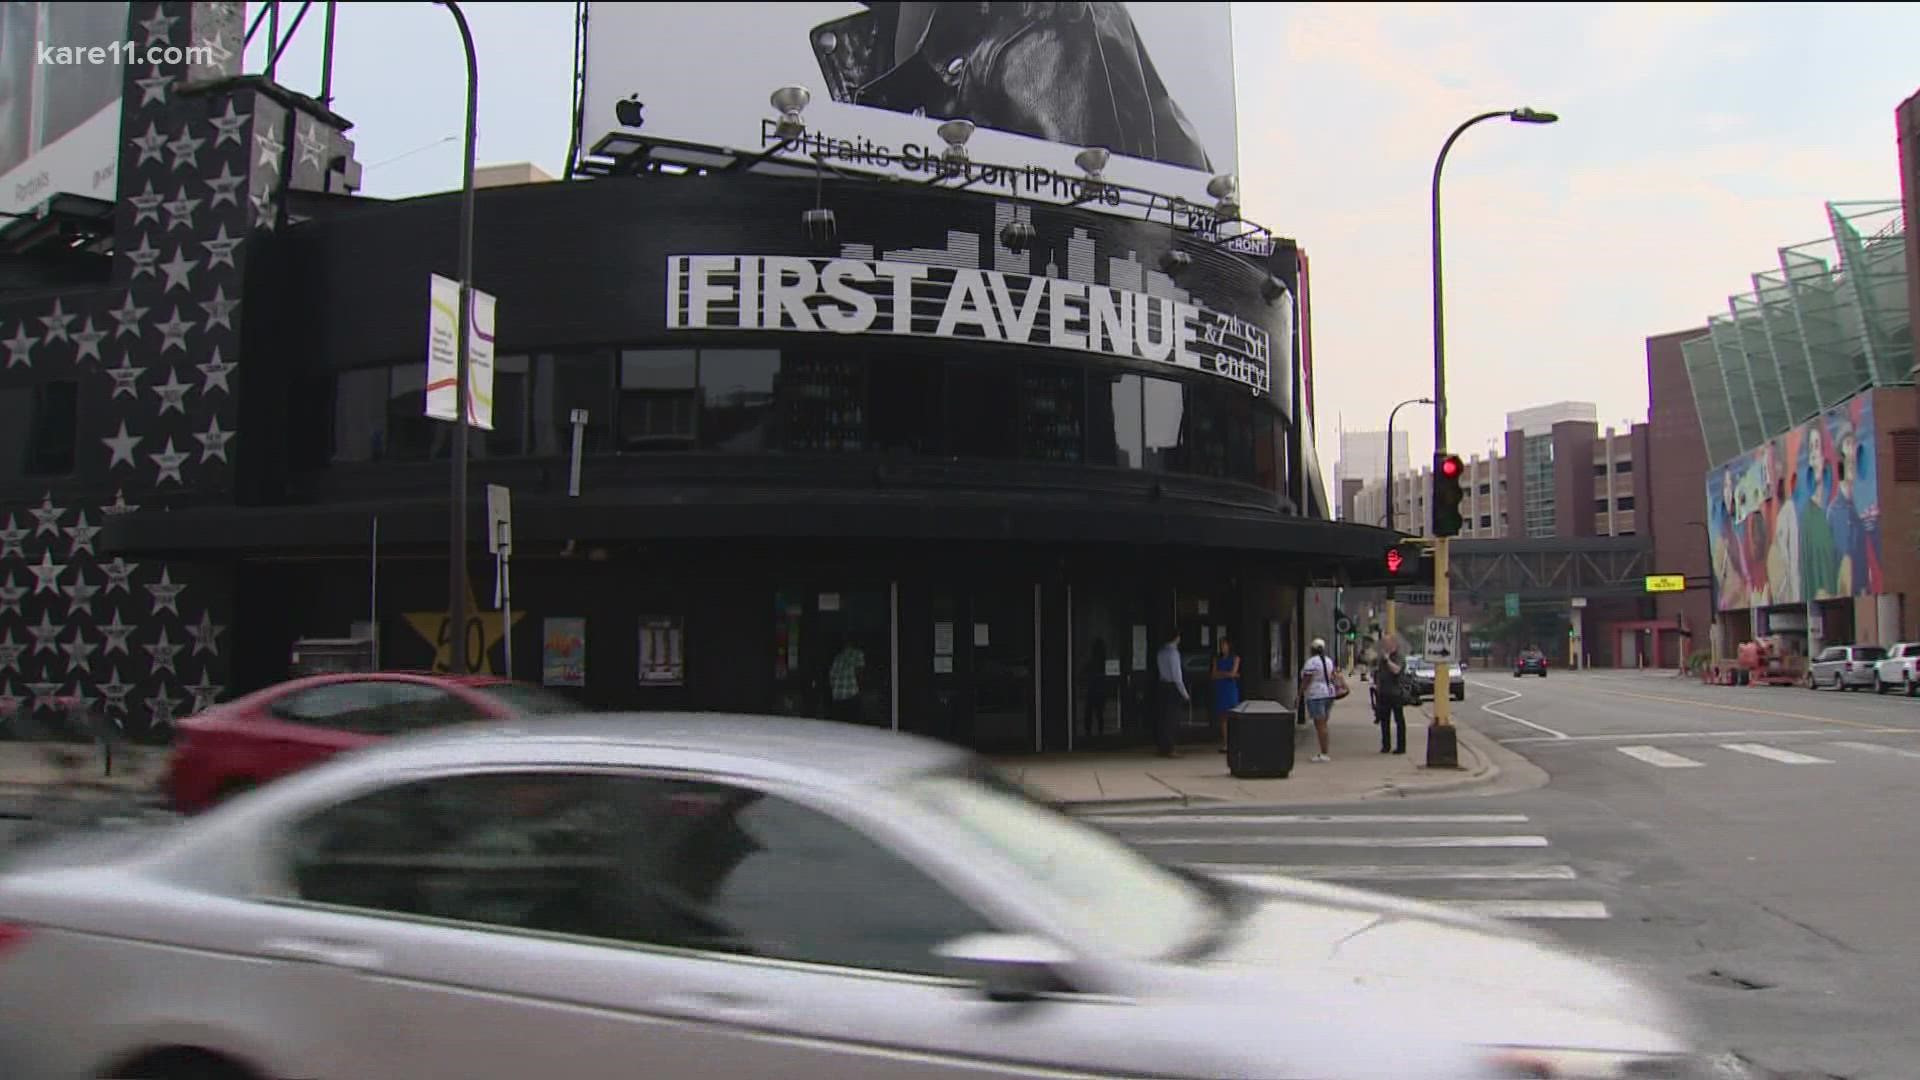 The new policy will apply to all events at First Avenue and its associated venues.